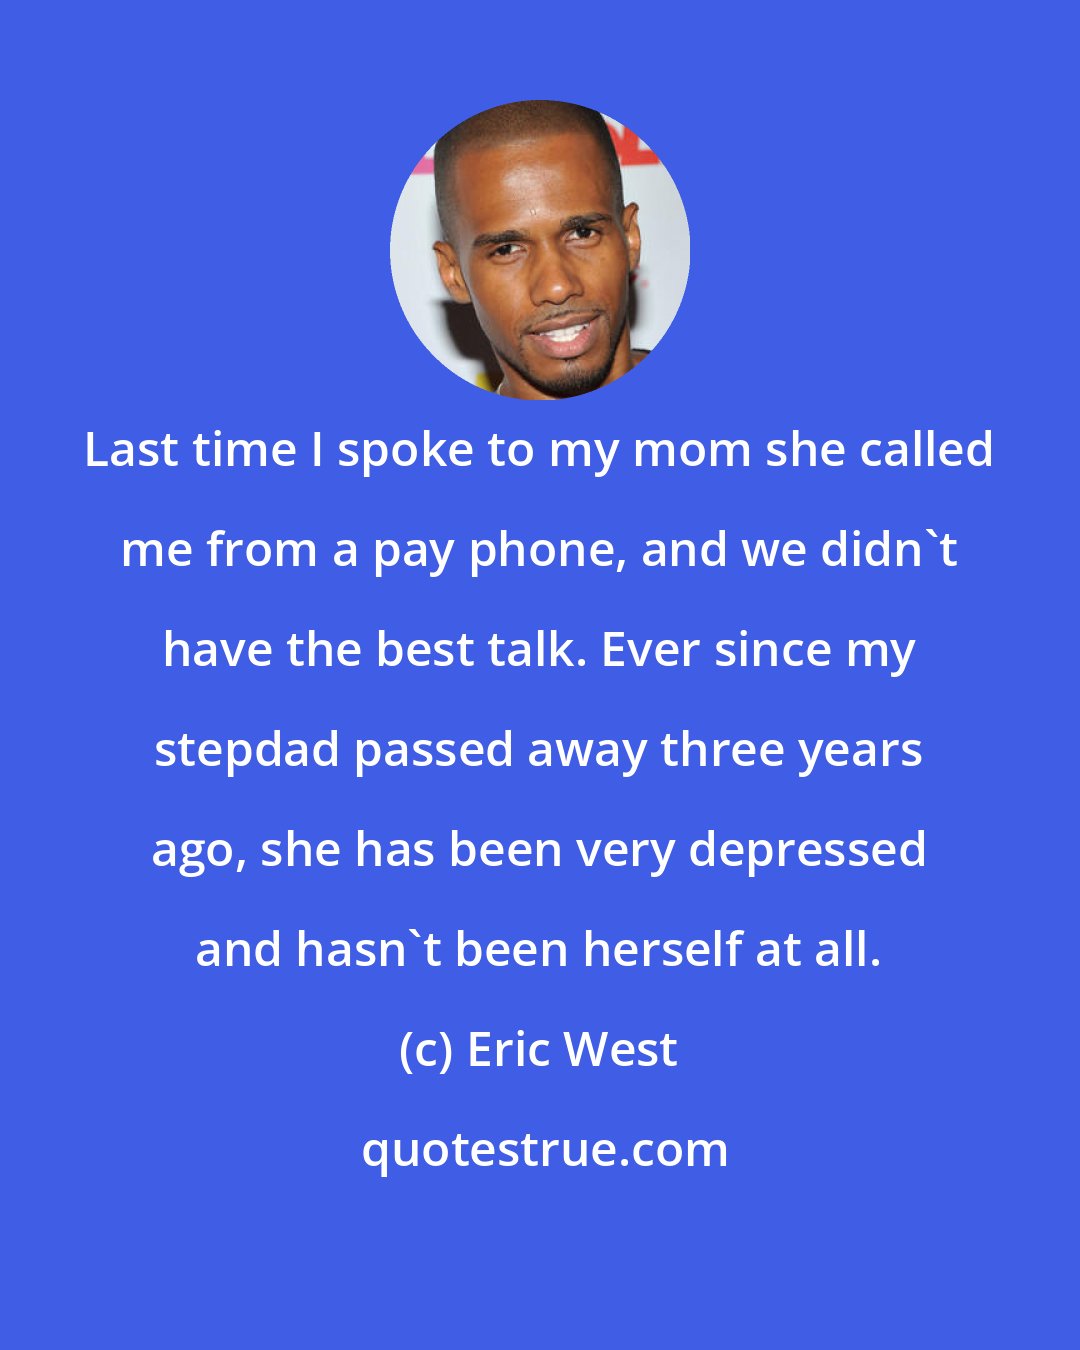 Eric West: Last time I spoke to my mom she called me from a pay phone, and we didn't have the best talk. Ever since my stepdad passed away three years ago, she has been very depressed and hasn't been herself at all.